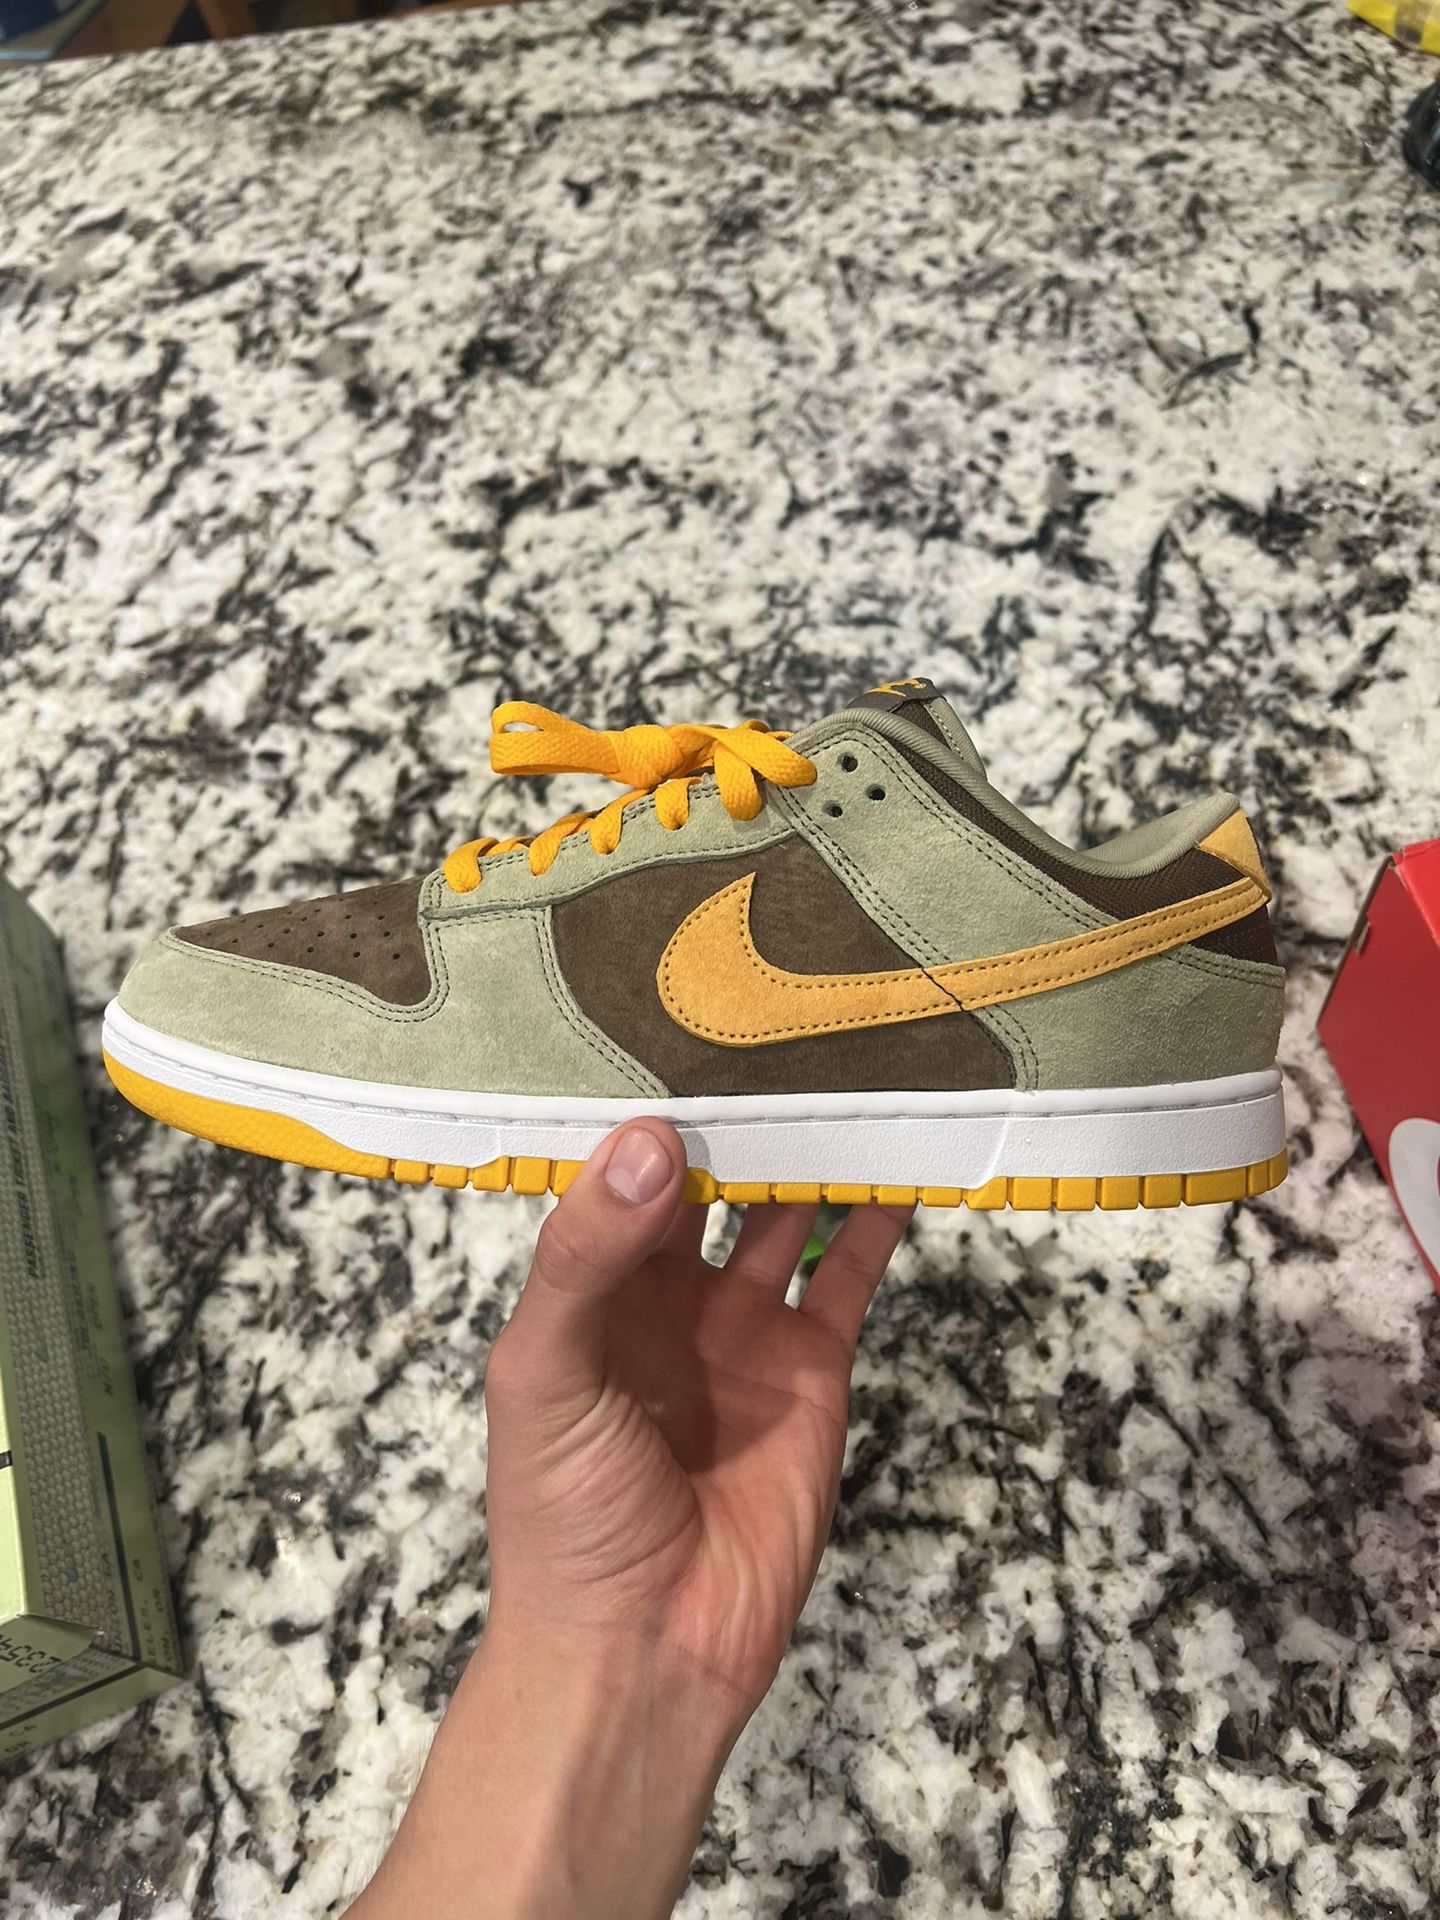 Dusty Olive Dunks 